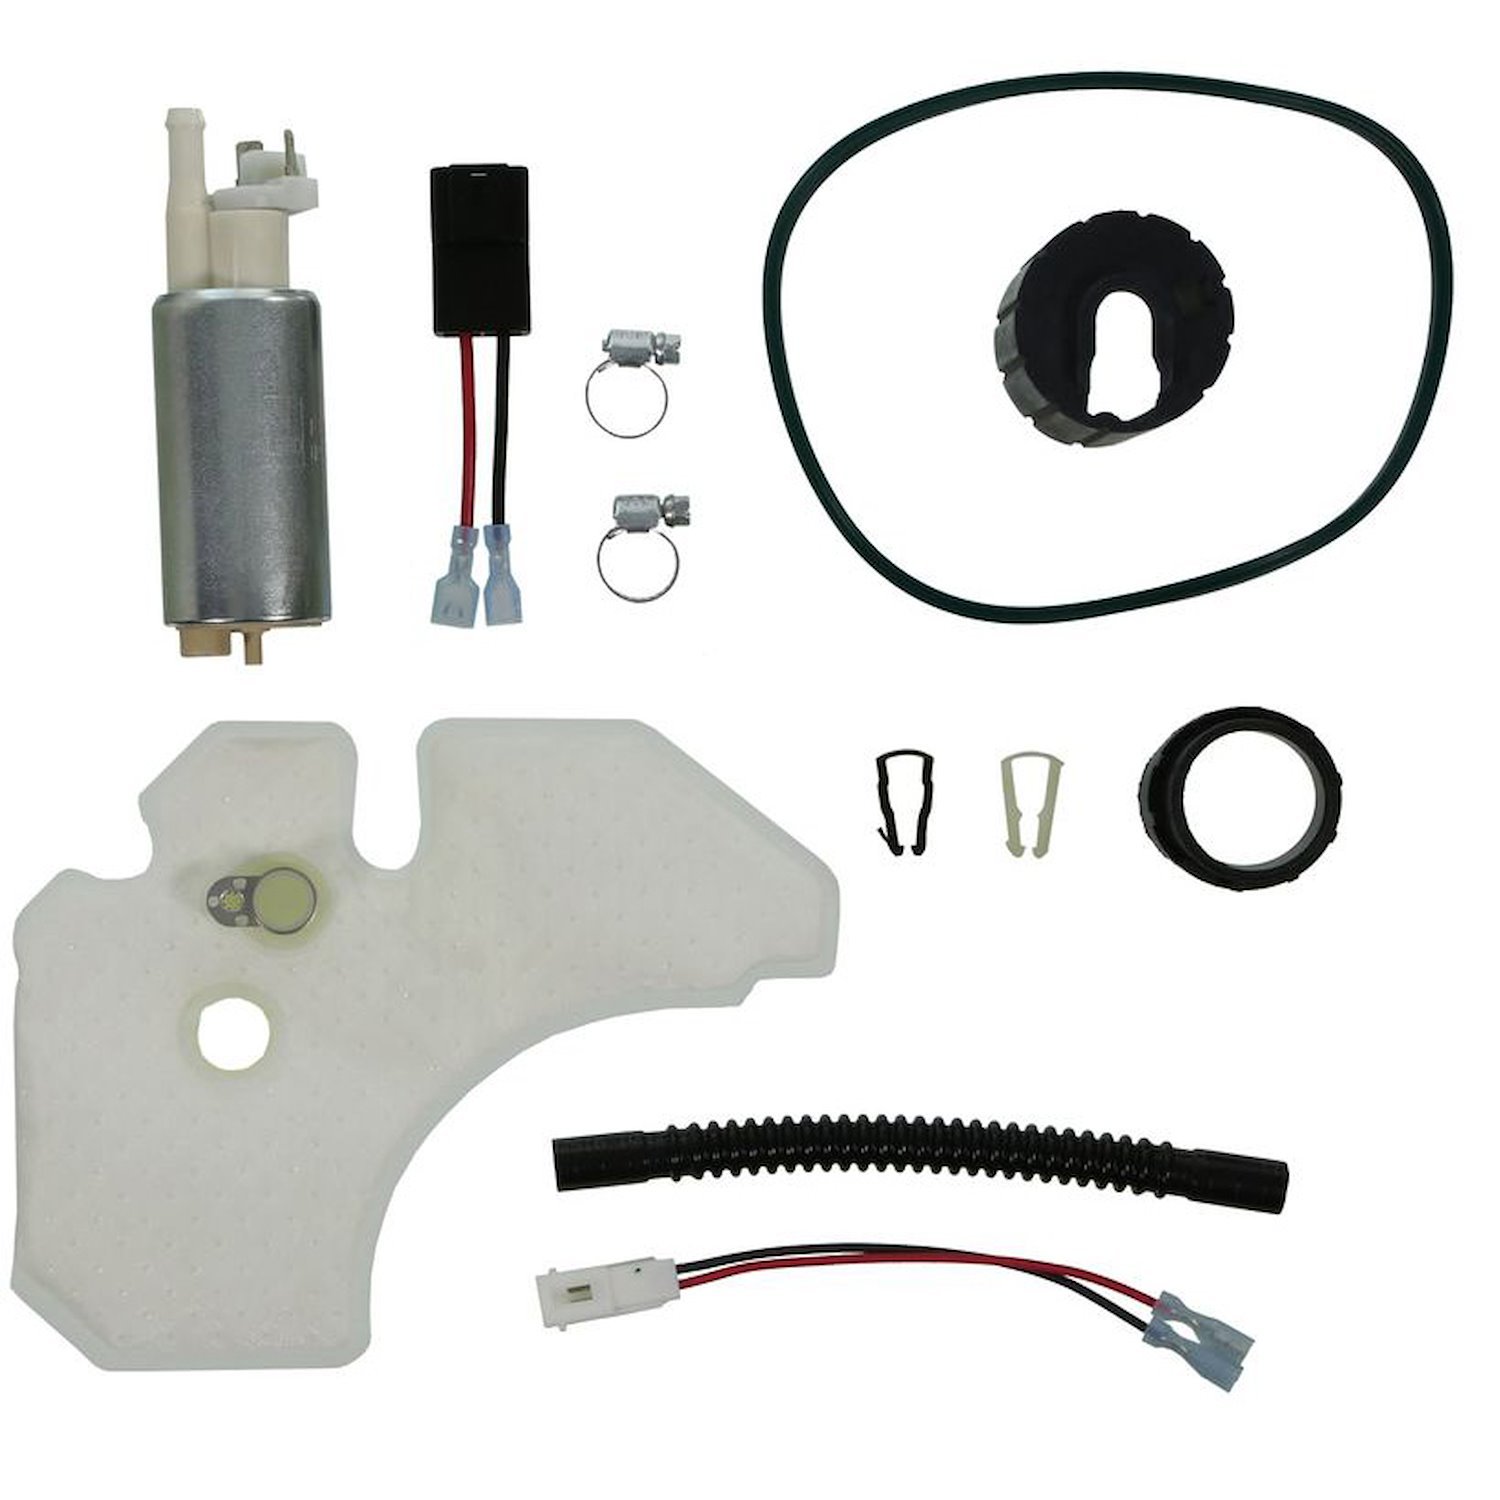 EFI In-Tank Fuel Pump for 2002-2003 Ford Explorer/Mercury Mountaineer